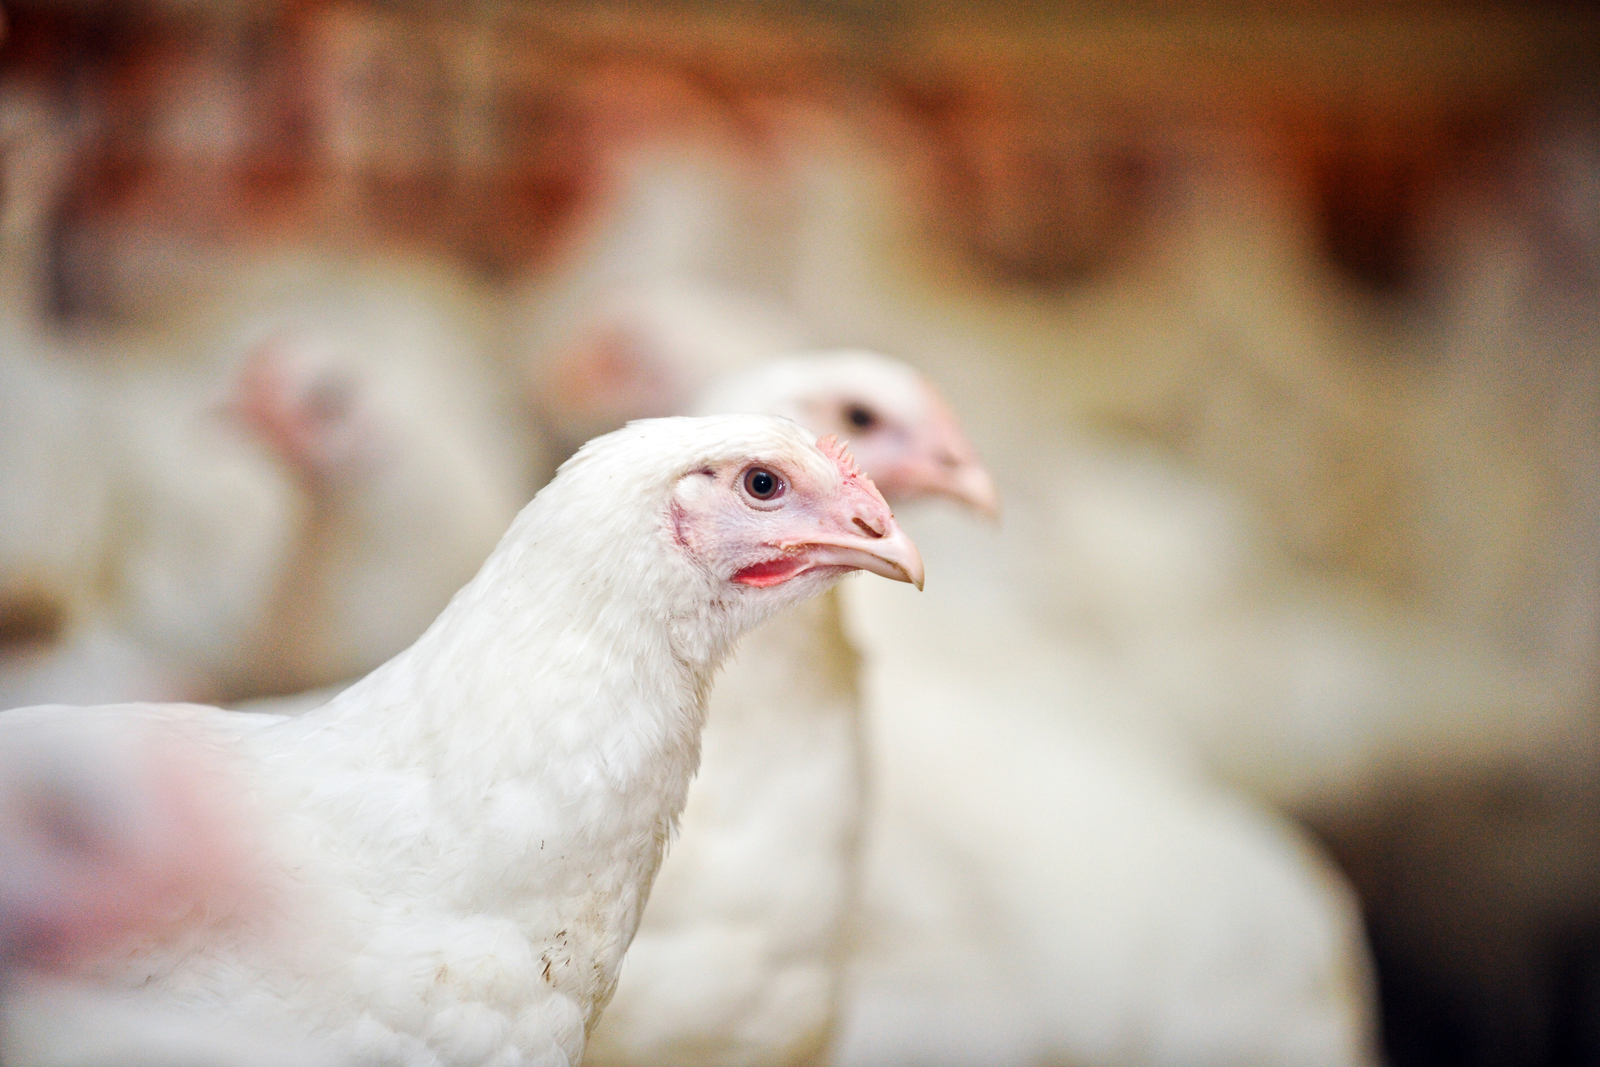 Australian clay: A non-antibiotic solution for poultry